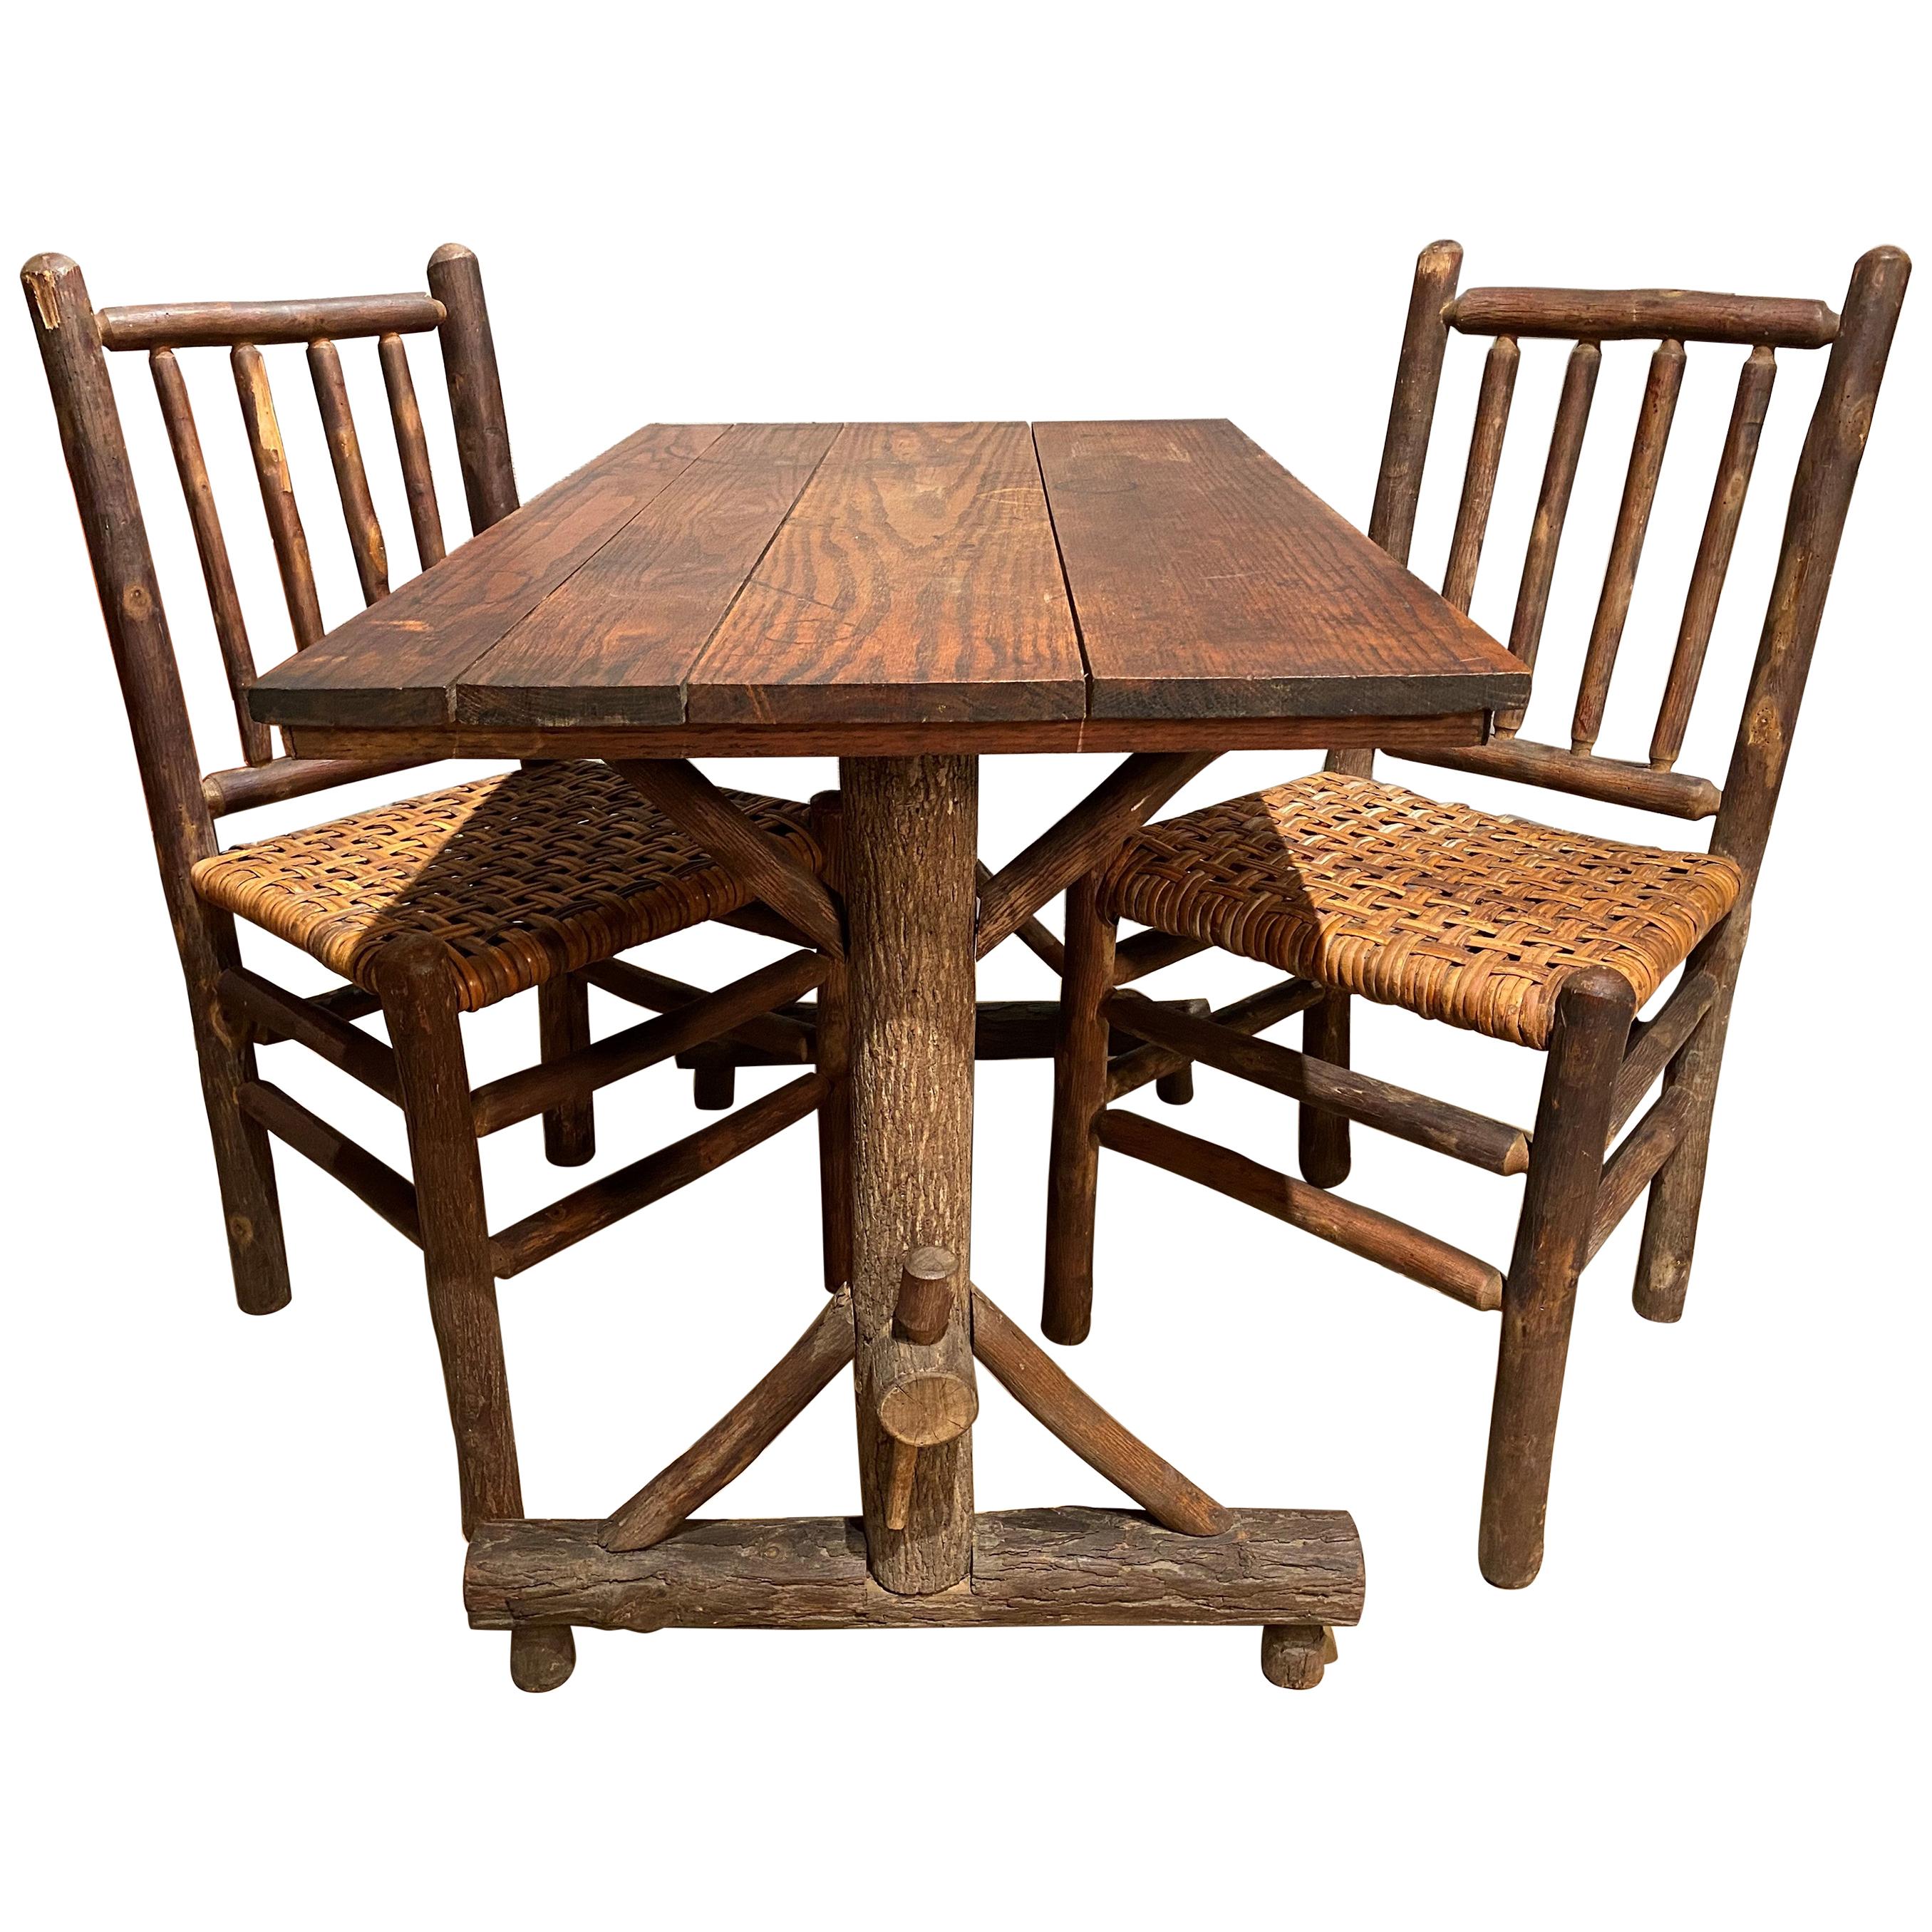 Old Hickory Rustic Davenport Form Table with Two Matching Chairs, circa 1940s